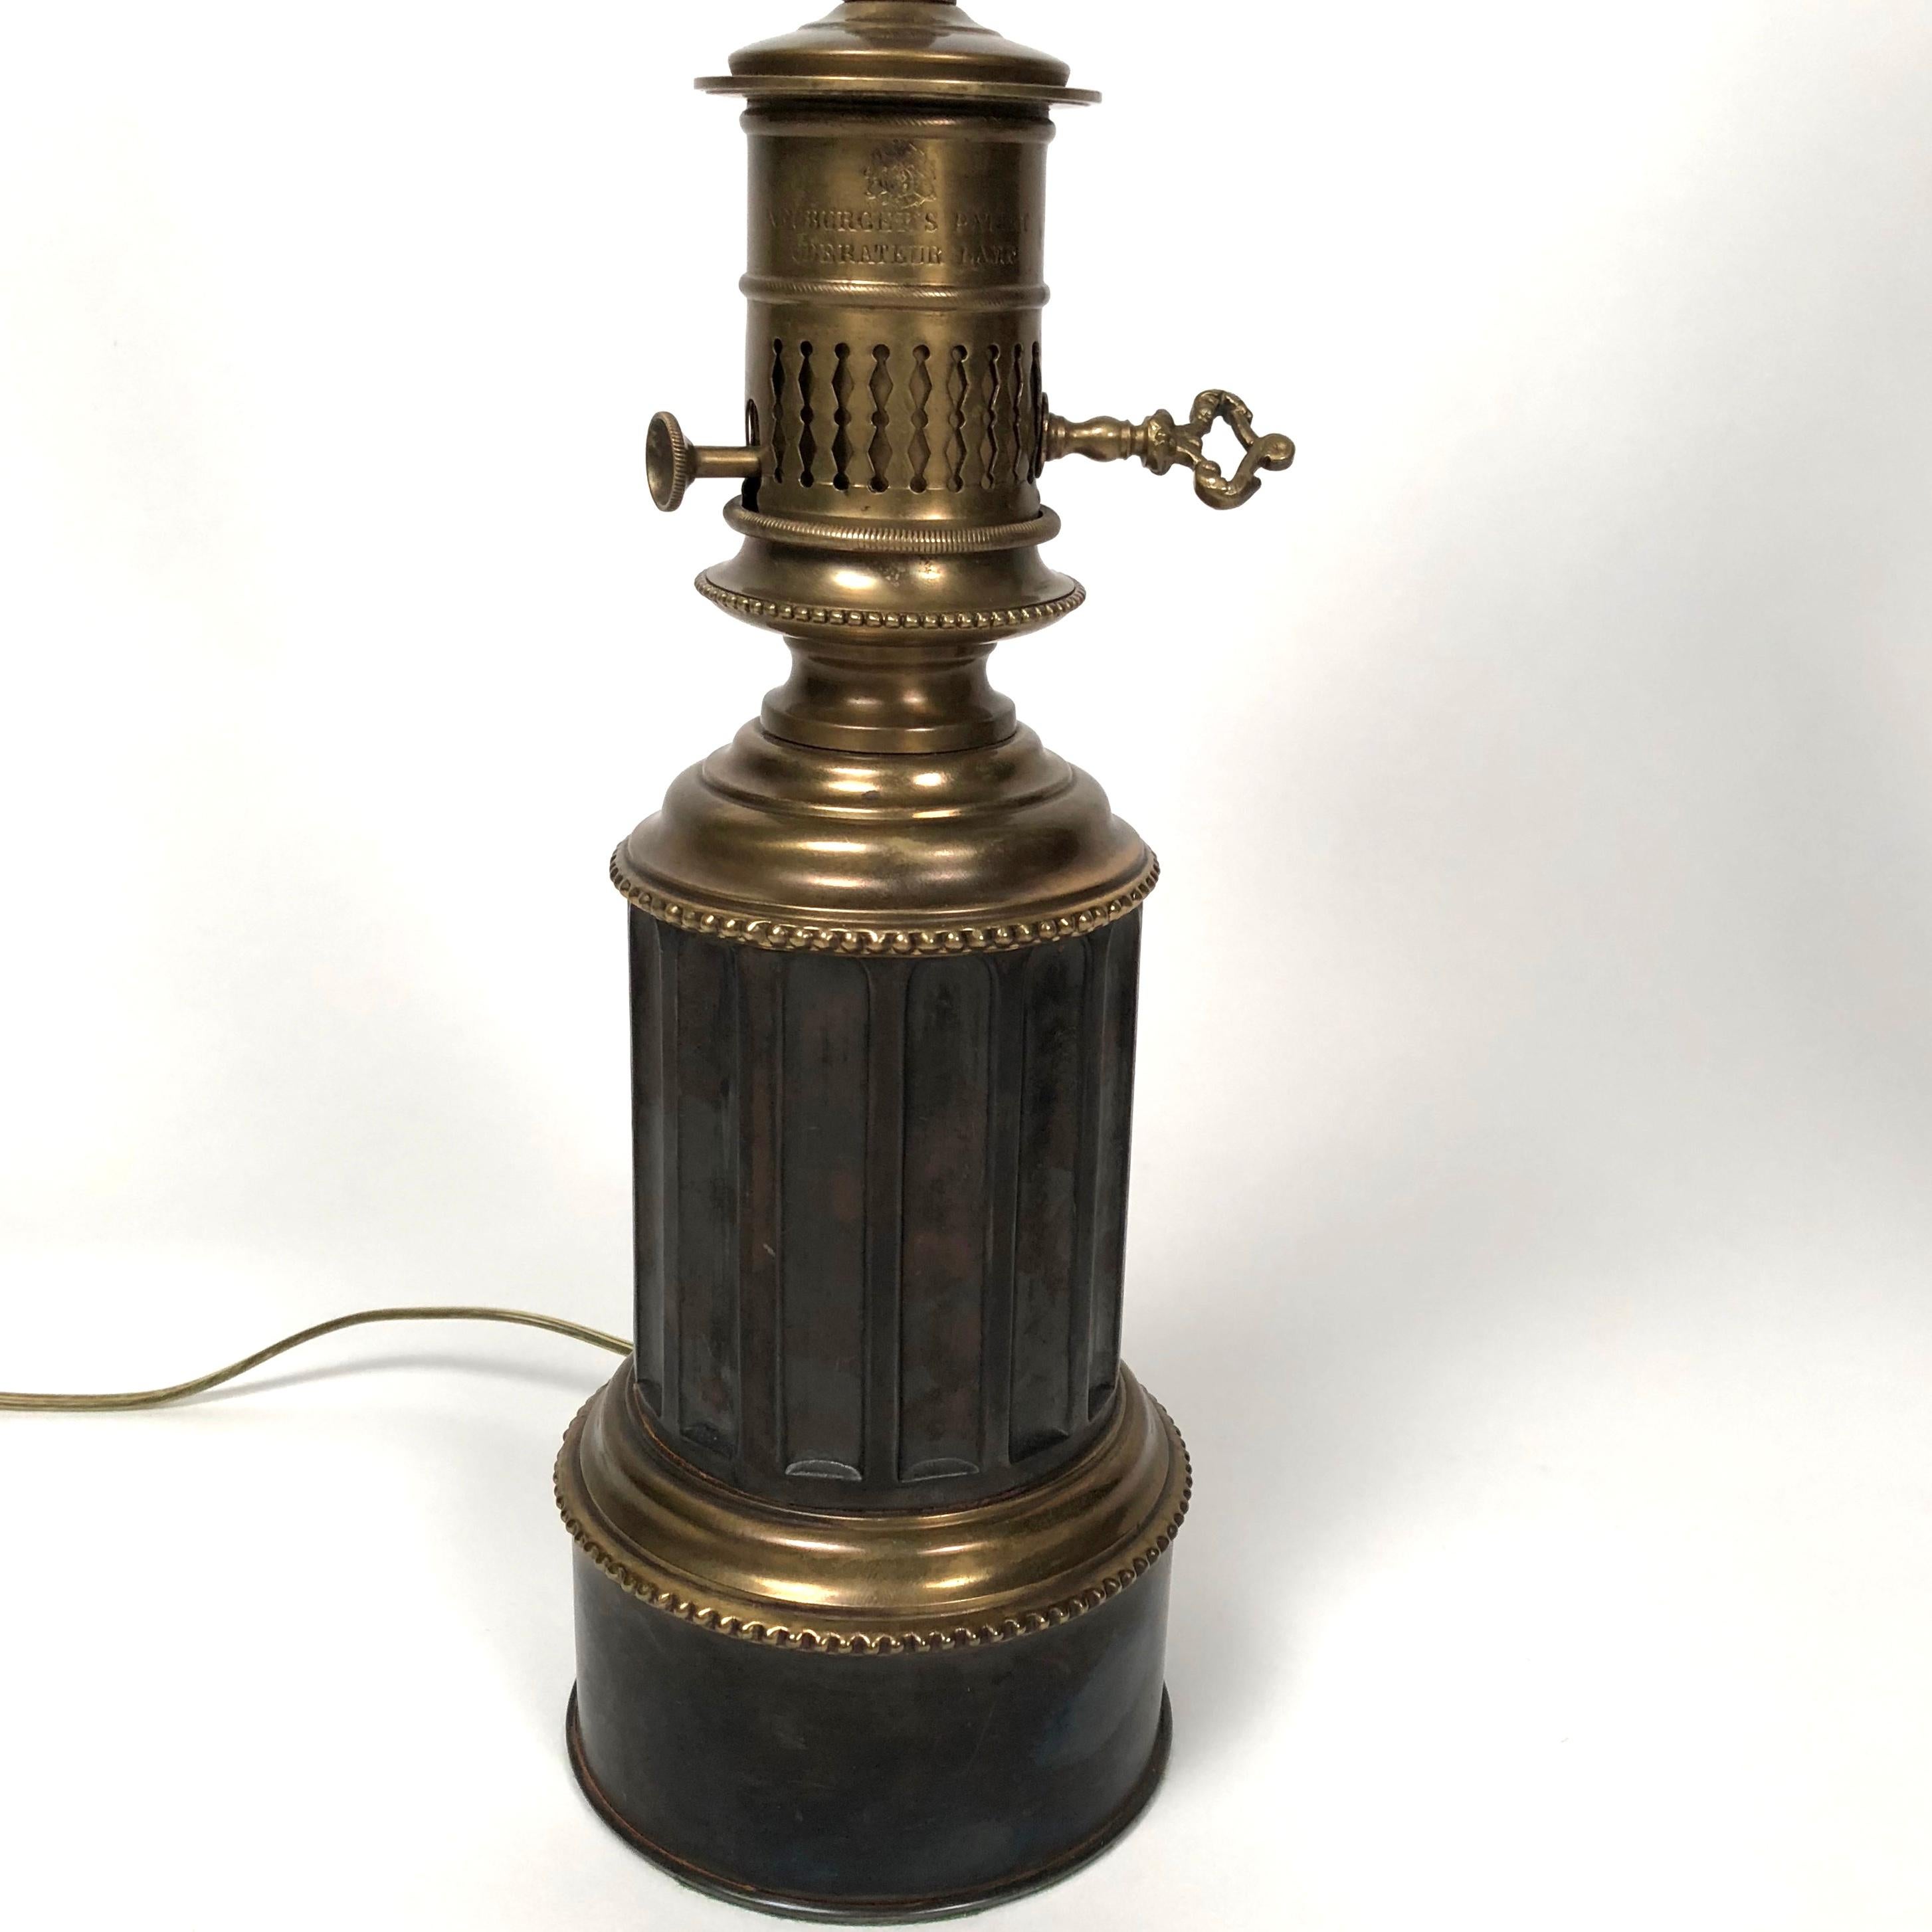 A pair of fine quality 19th century French neoclassical fluted column oil lamps, now electrified, in brass and steel, by Neuberger, Paris, French, circa 1875, with custom made pleated silk shades and brass wreath finials. Signed. Newly